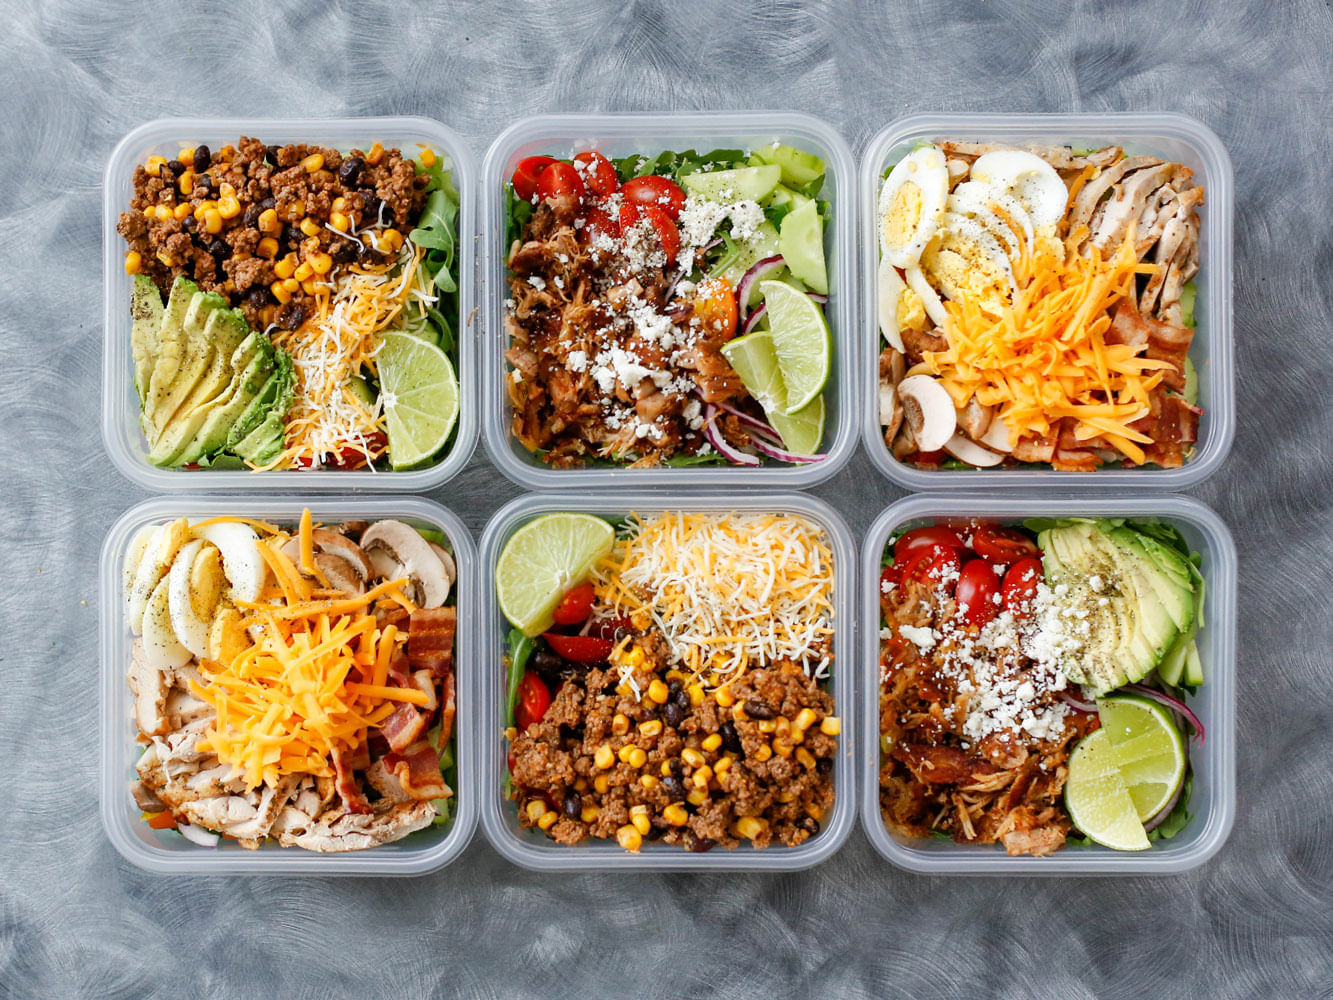 5 Healthiest At-Your-Desk Lunch Ideas